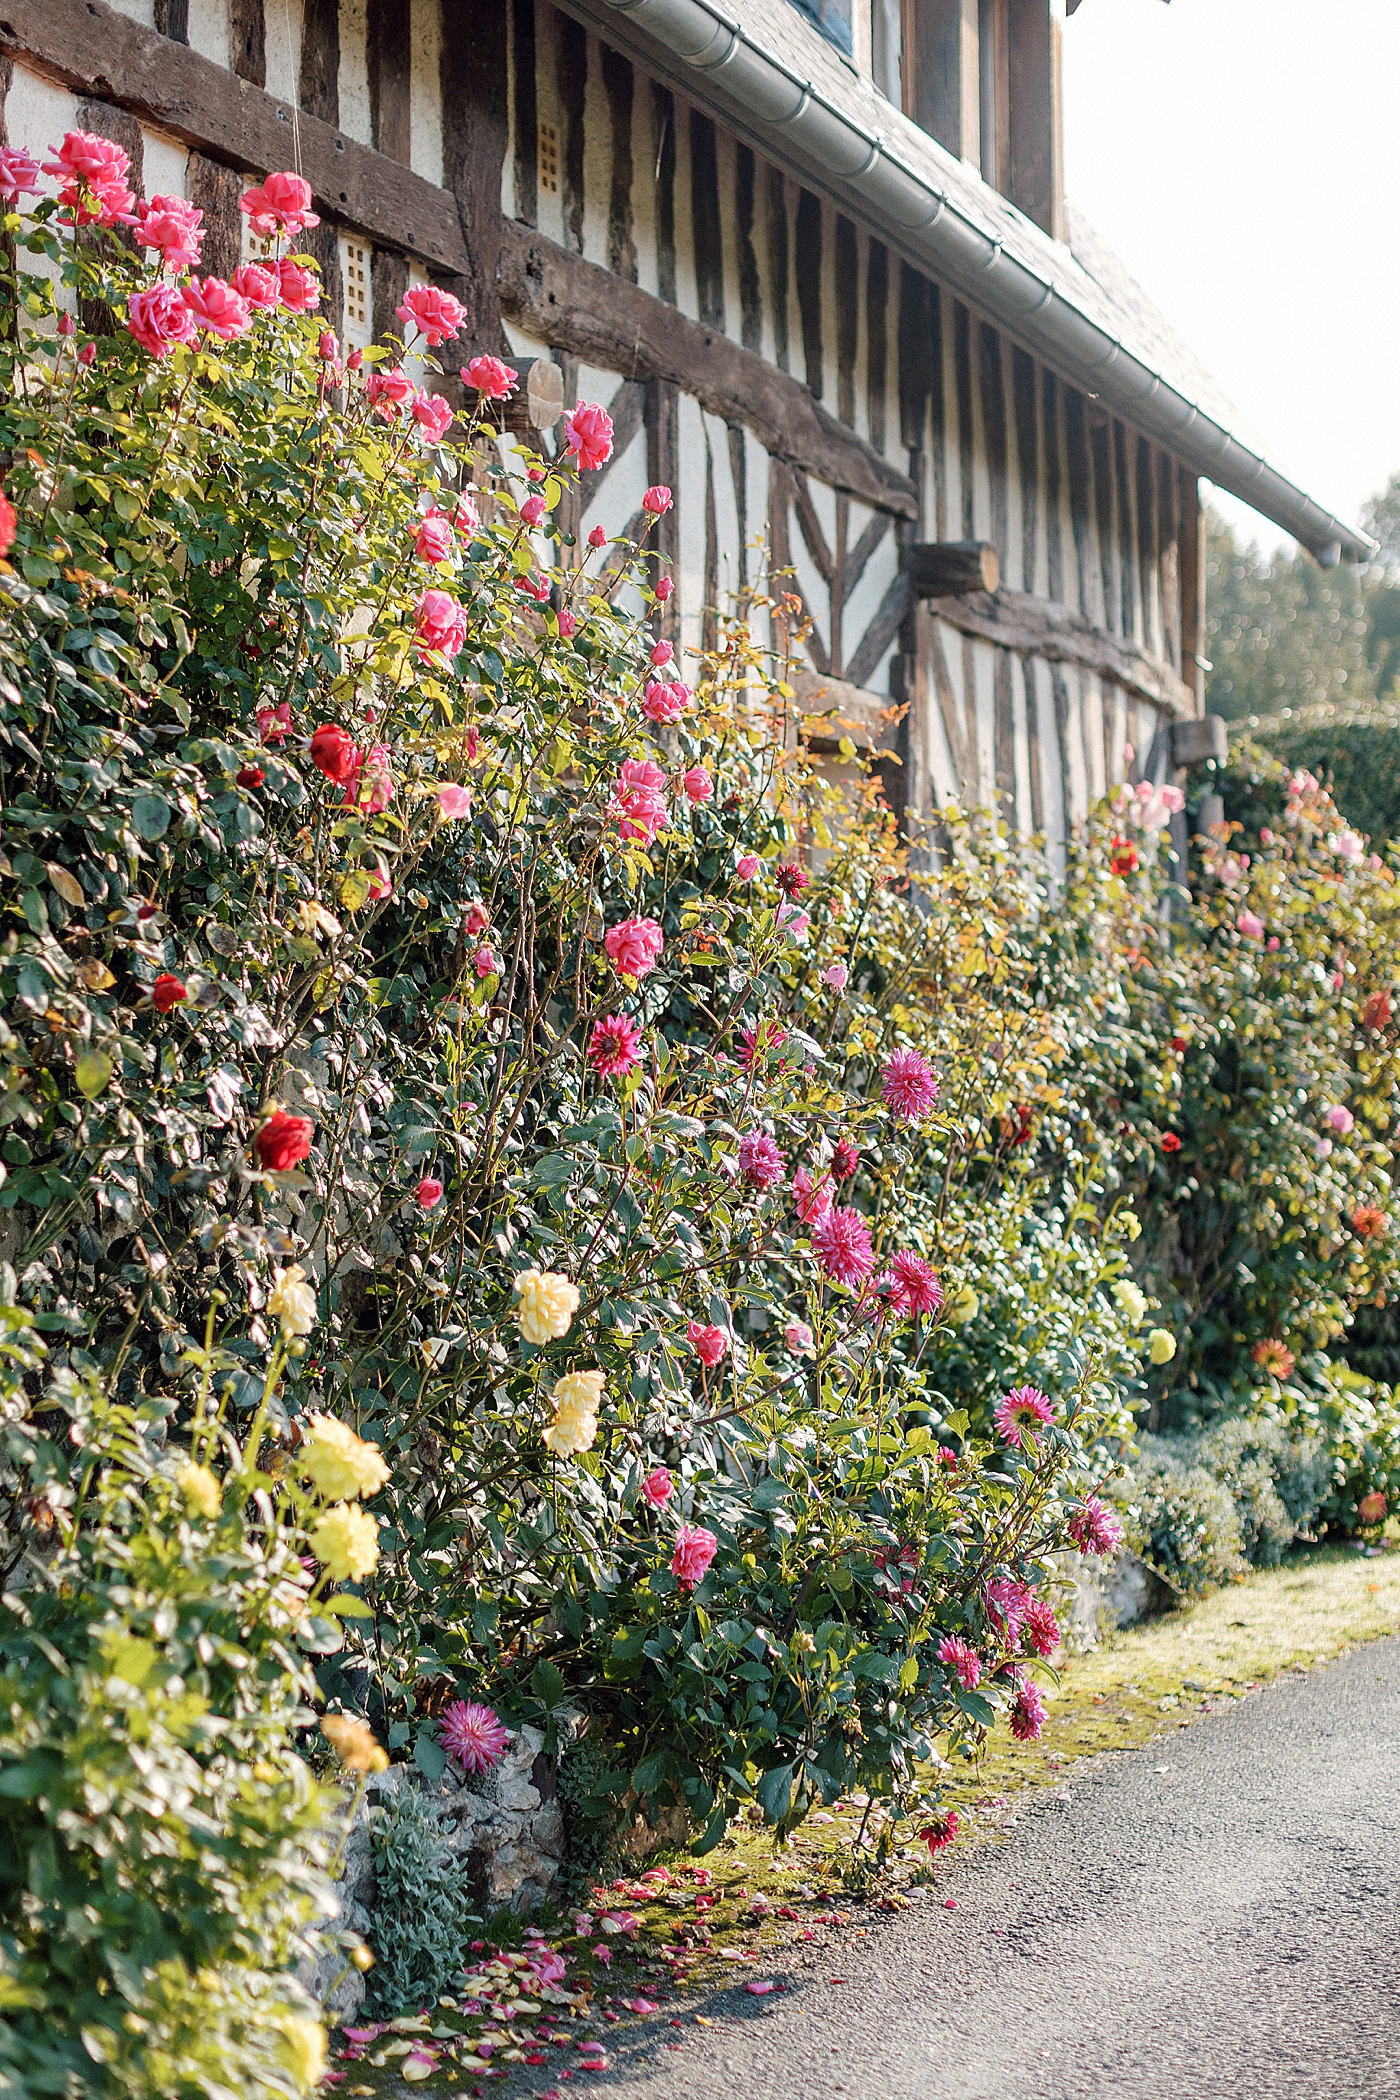 Climbing roses on the side of a French country estate | Image by Hope Helmuth Photography